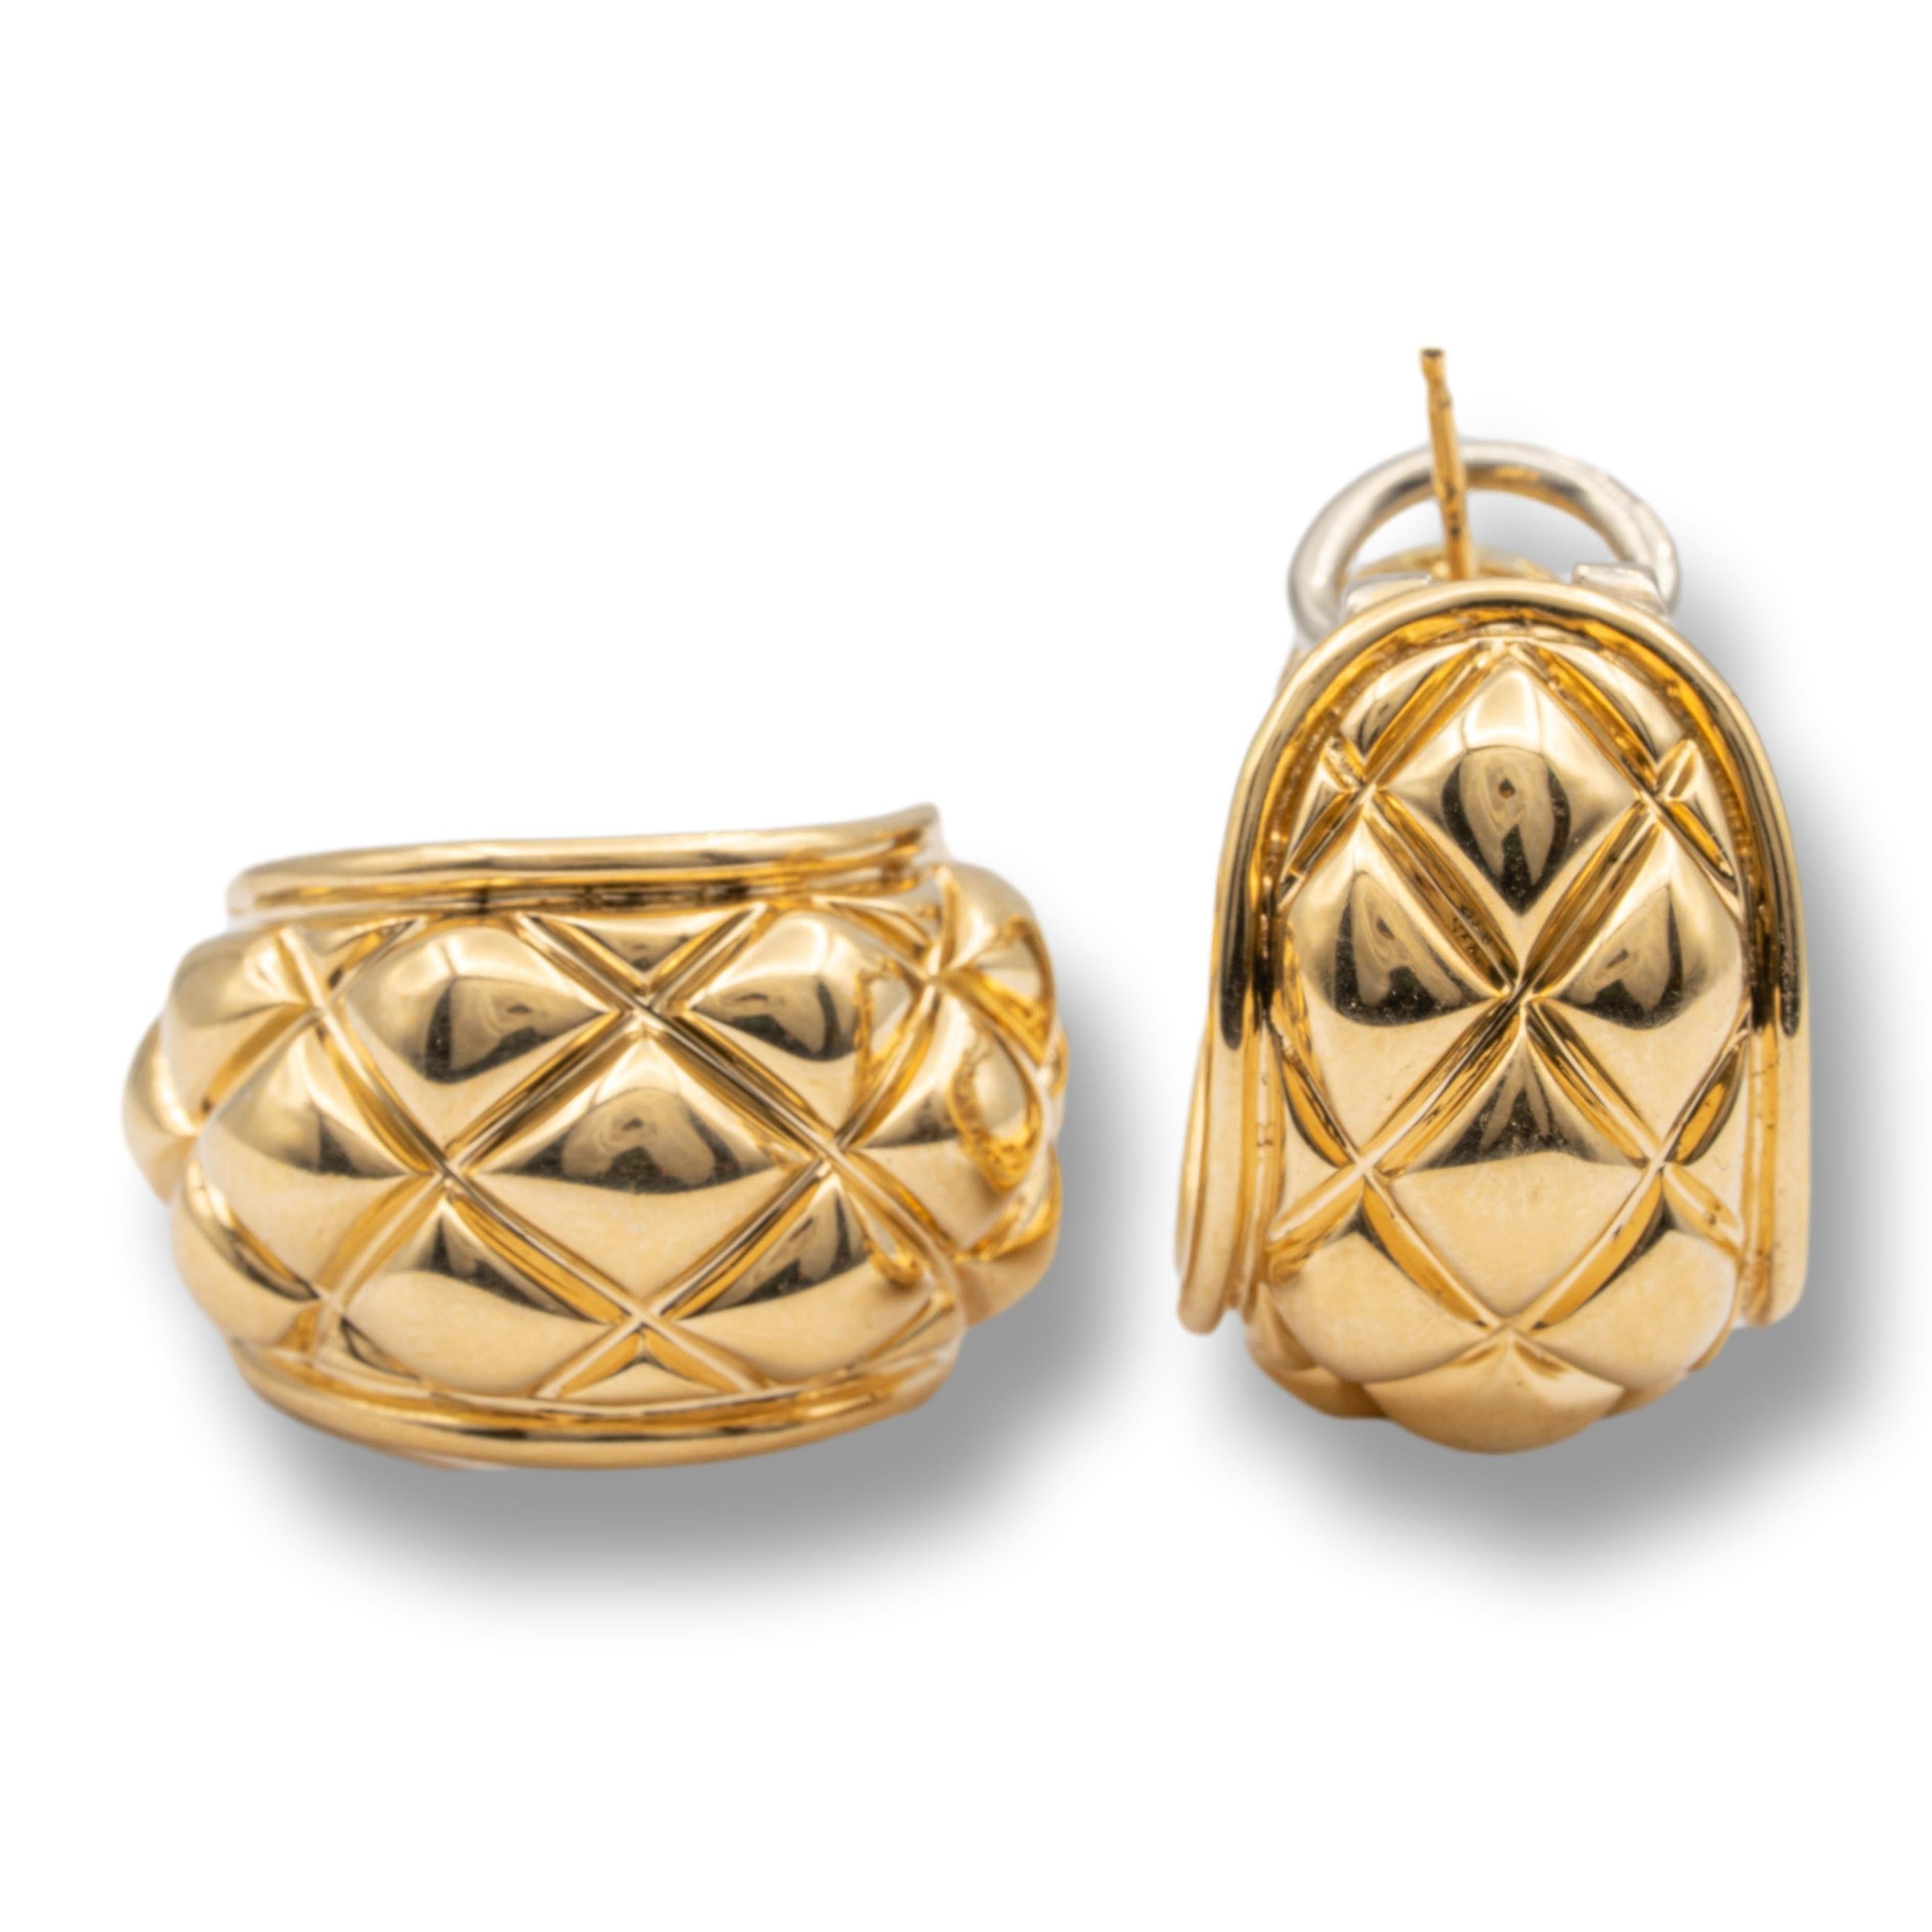 A classic pair of Chaumet earrings finely crafted in 18 Karat high polished yellow gold.
Half-Hoop , chunky design . Omega clip backs

Brand: Chaumet
Hallmarks: Chaumet, Paris No. 103371
Measurements: 0.5 X 1